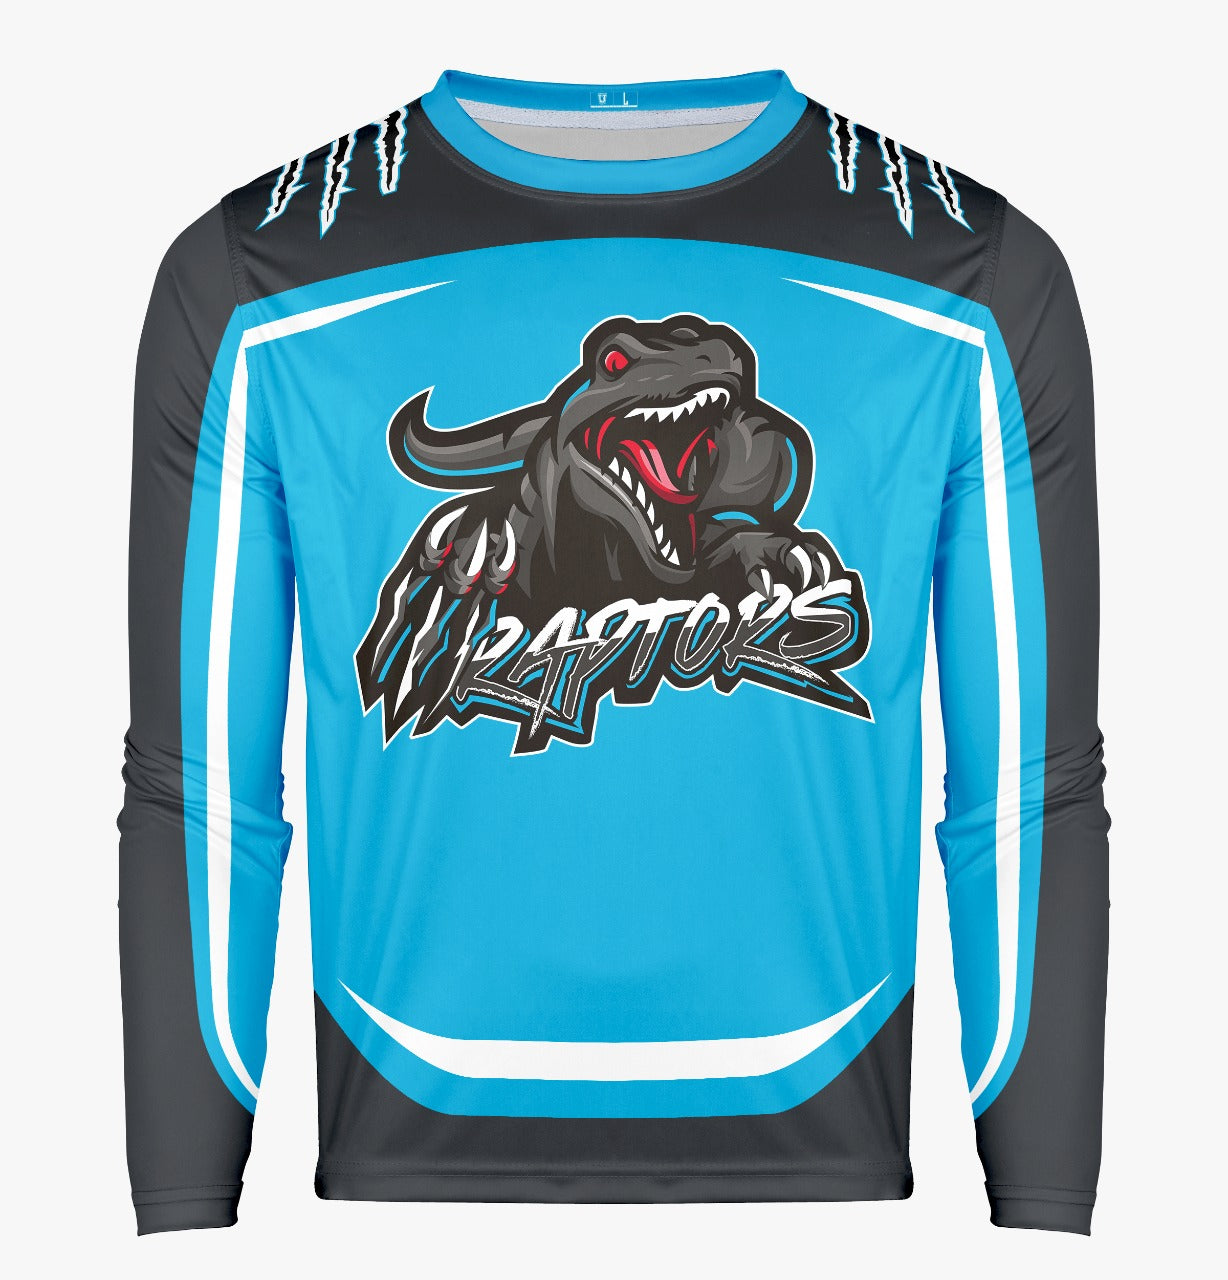 Raptors Pro Performance Sun Long Sleeve ~ Jersey Replica (NEW Color formulated to match jersey)